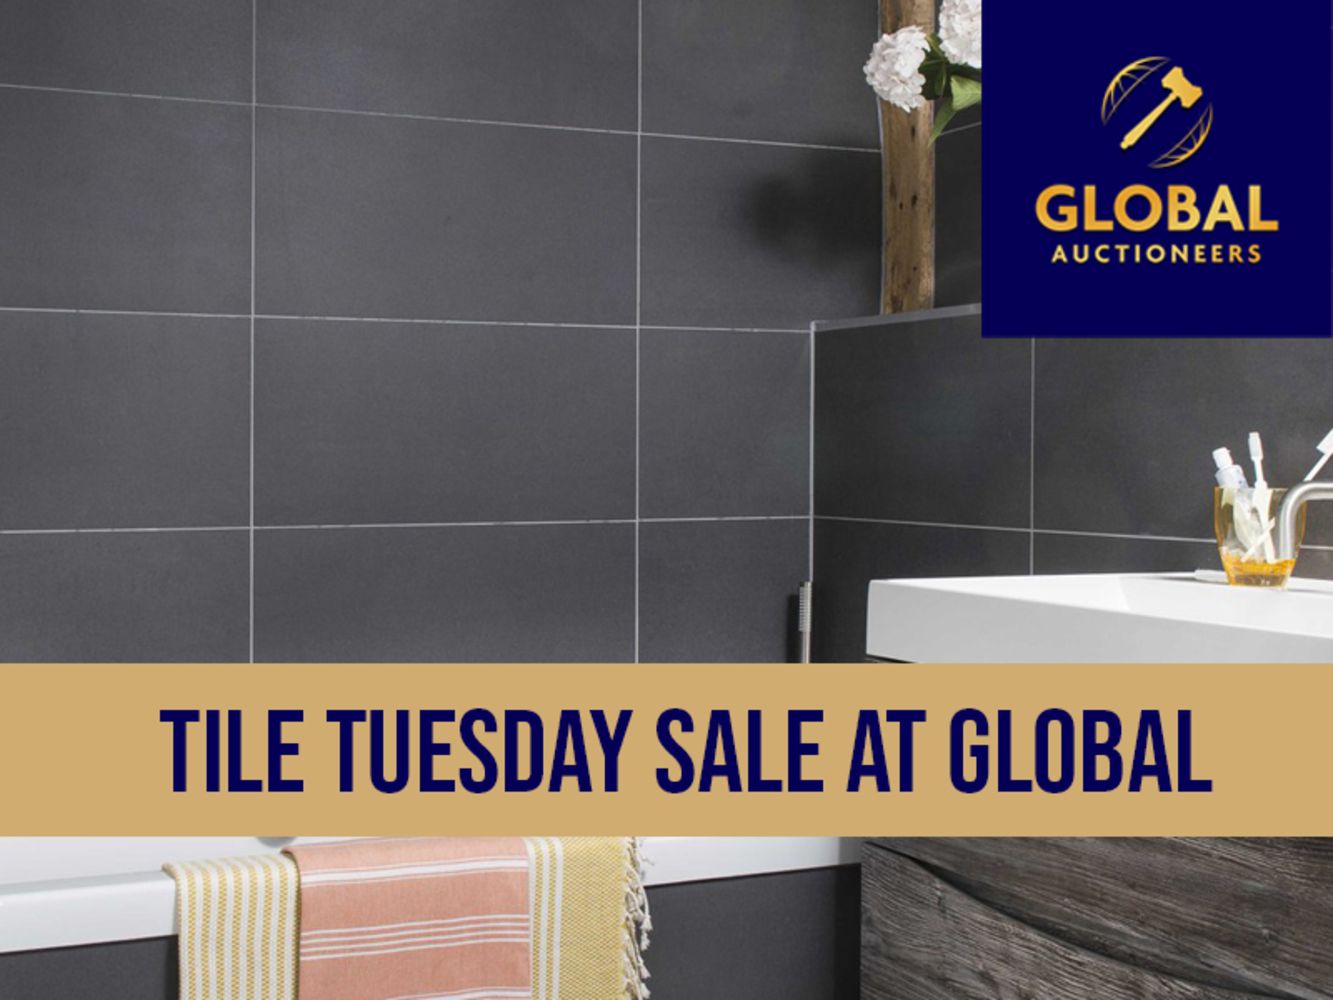 Tile Tuesday - “over £80k worth of tiles – Sourced from Johnsons Tiles” - 16th November 2021